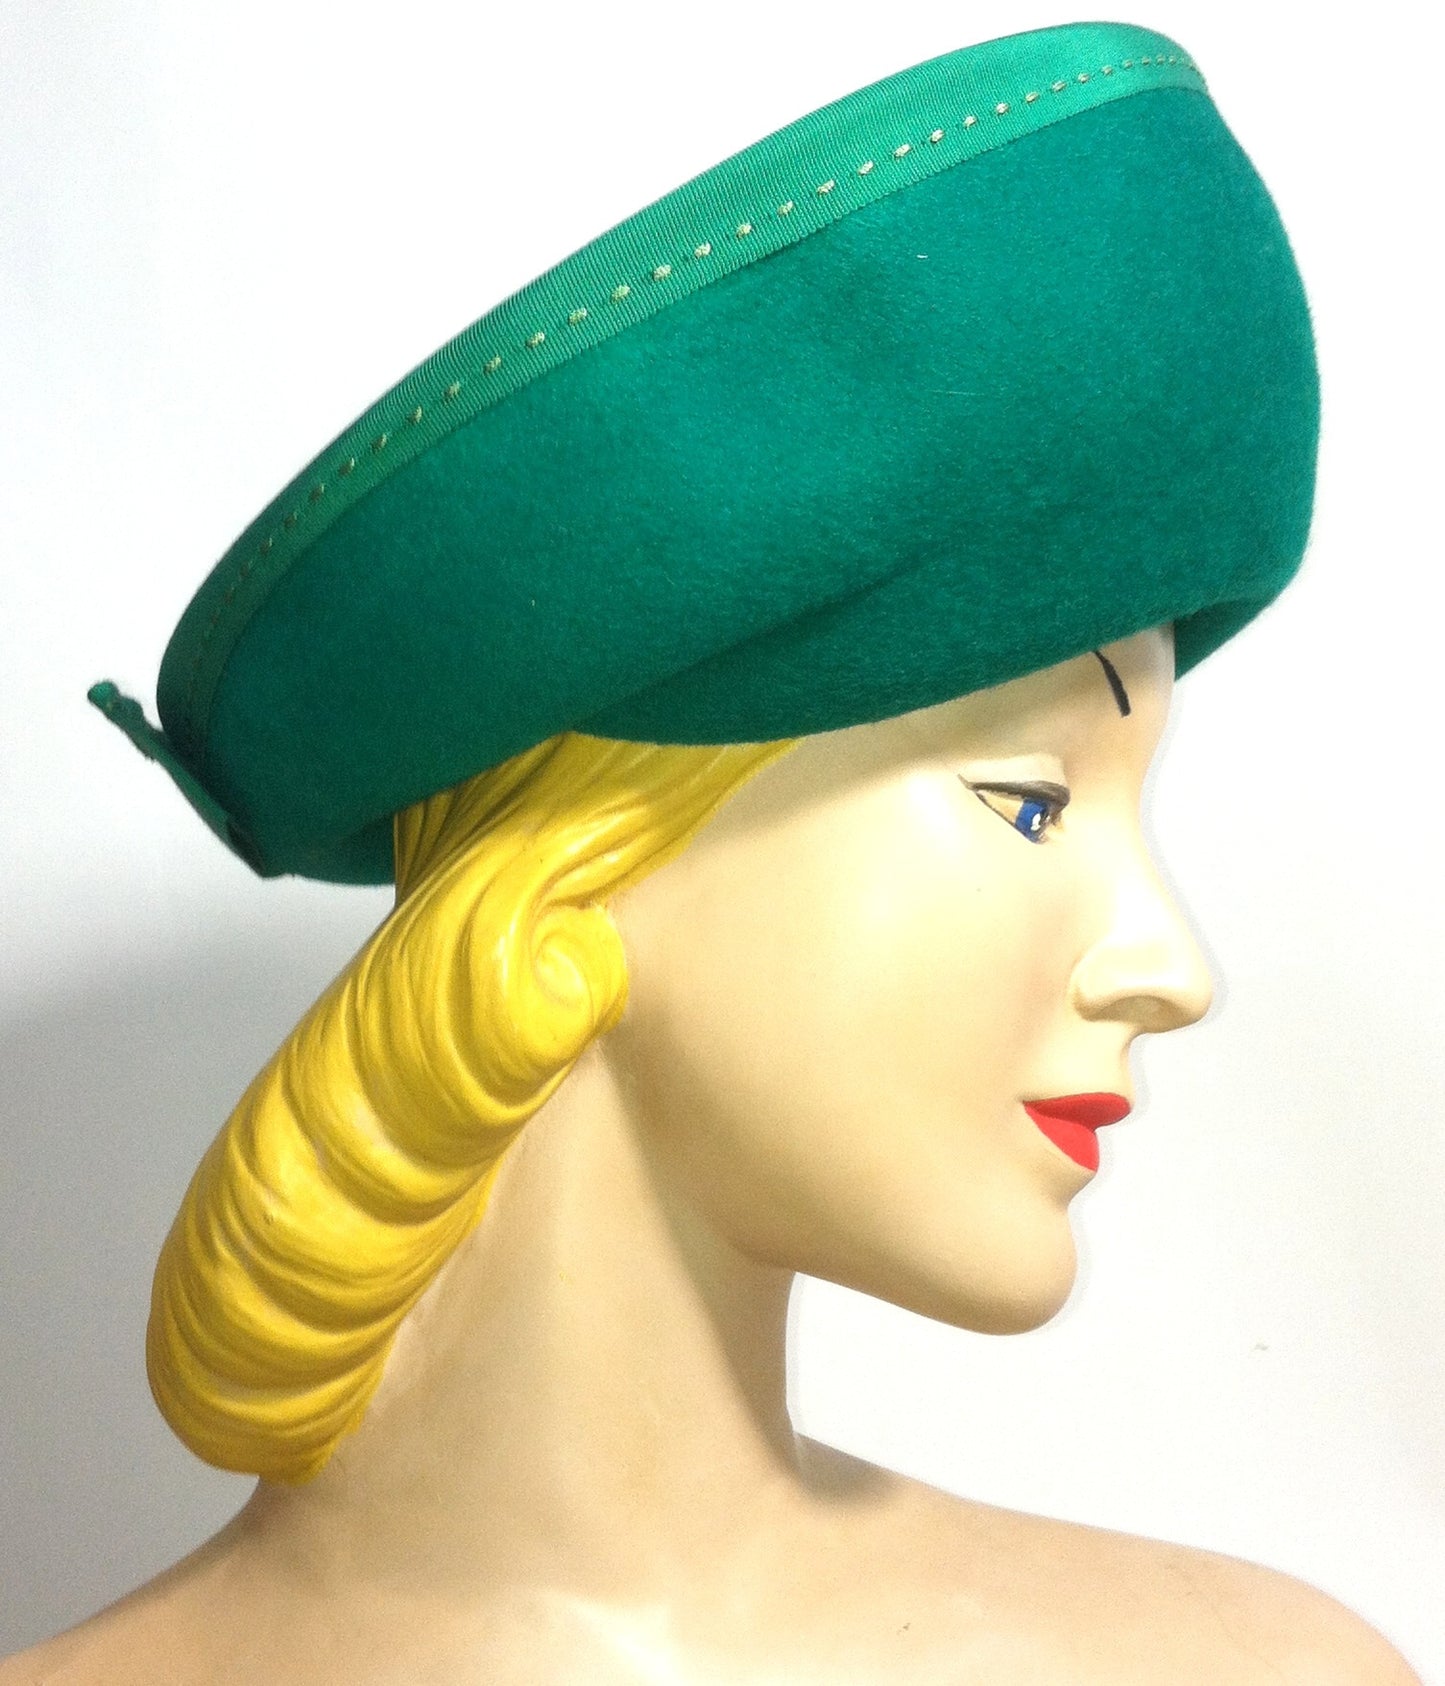 Kelly Green Rounded Curved Brim Hat w/ Topstitch Ribbon and Bow circa 1960s Dorothea's Closet Vintage Hat